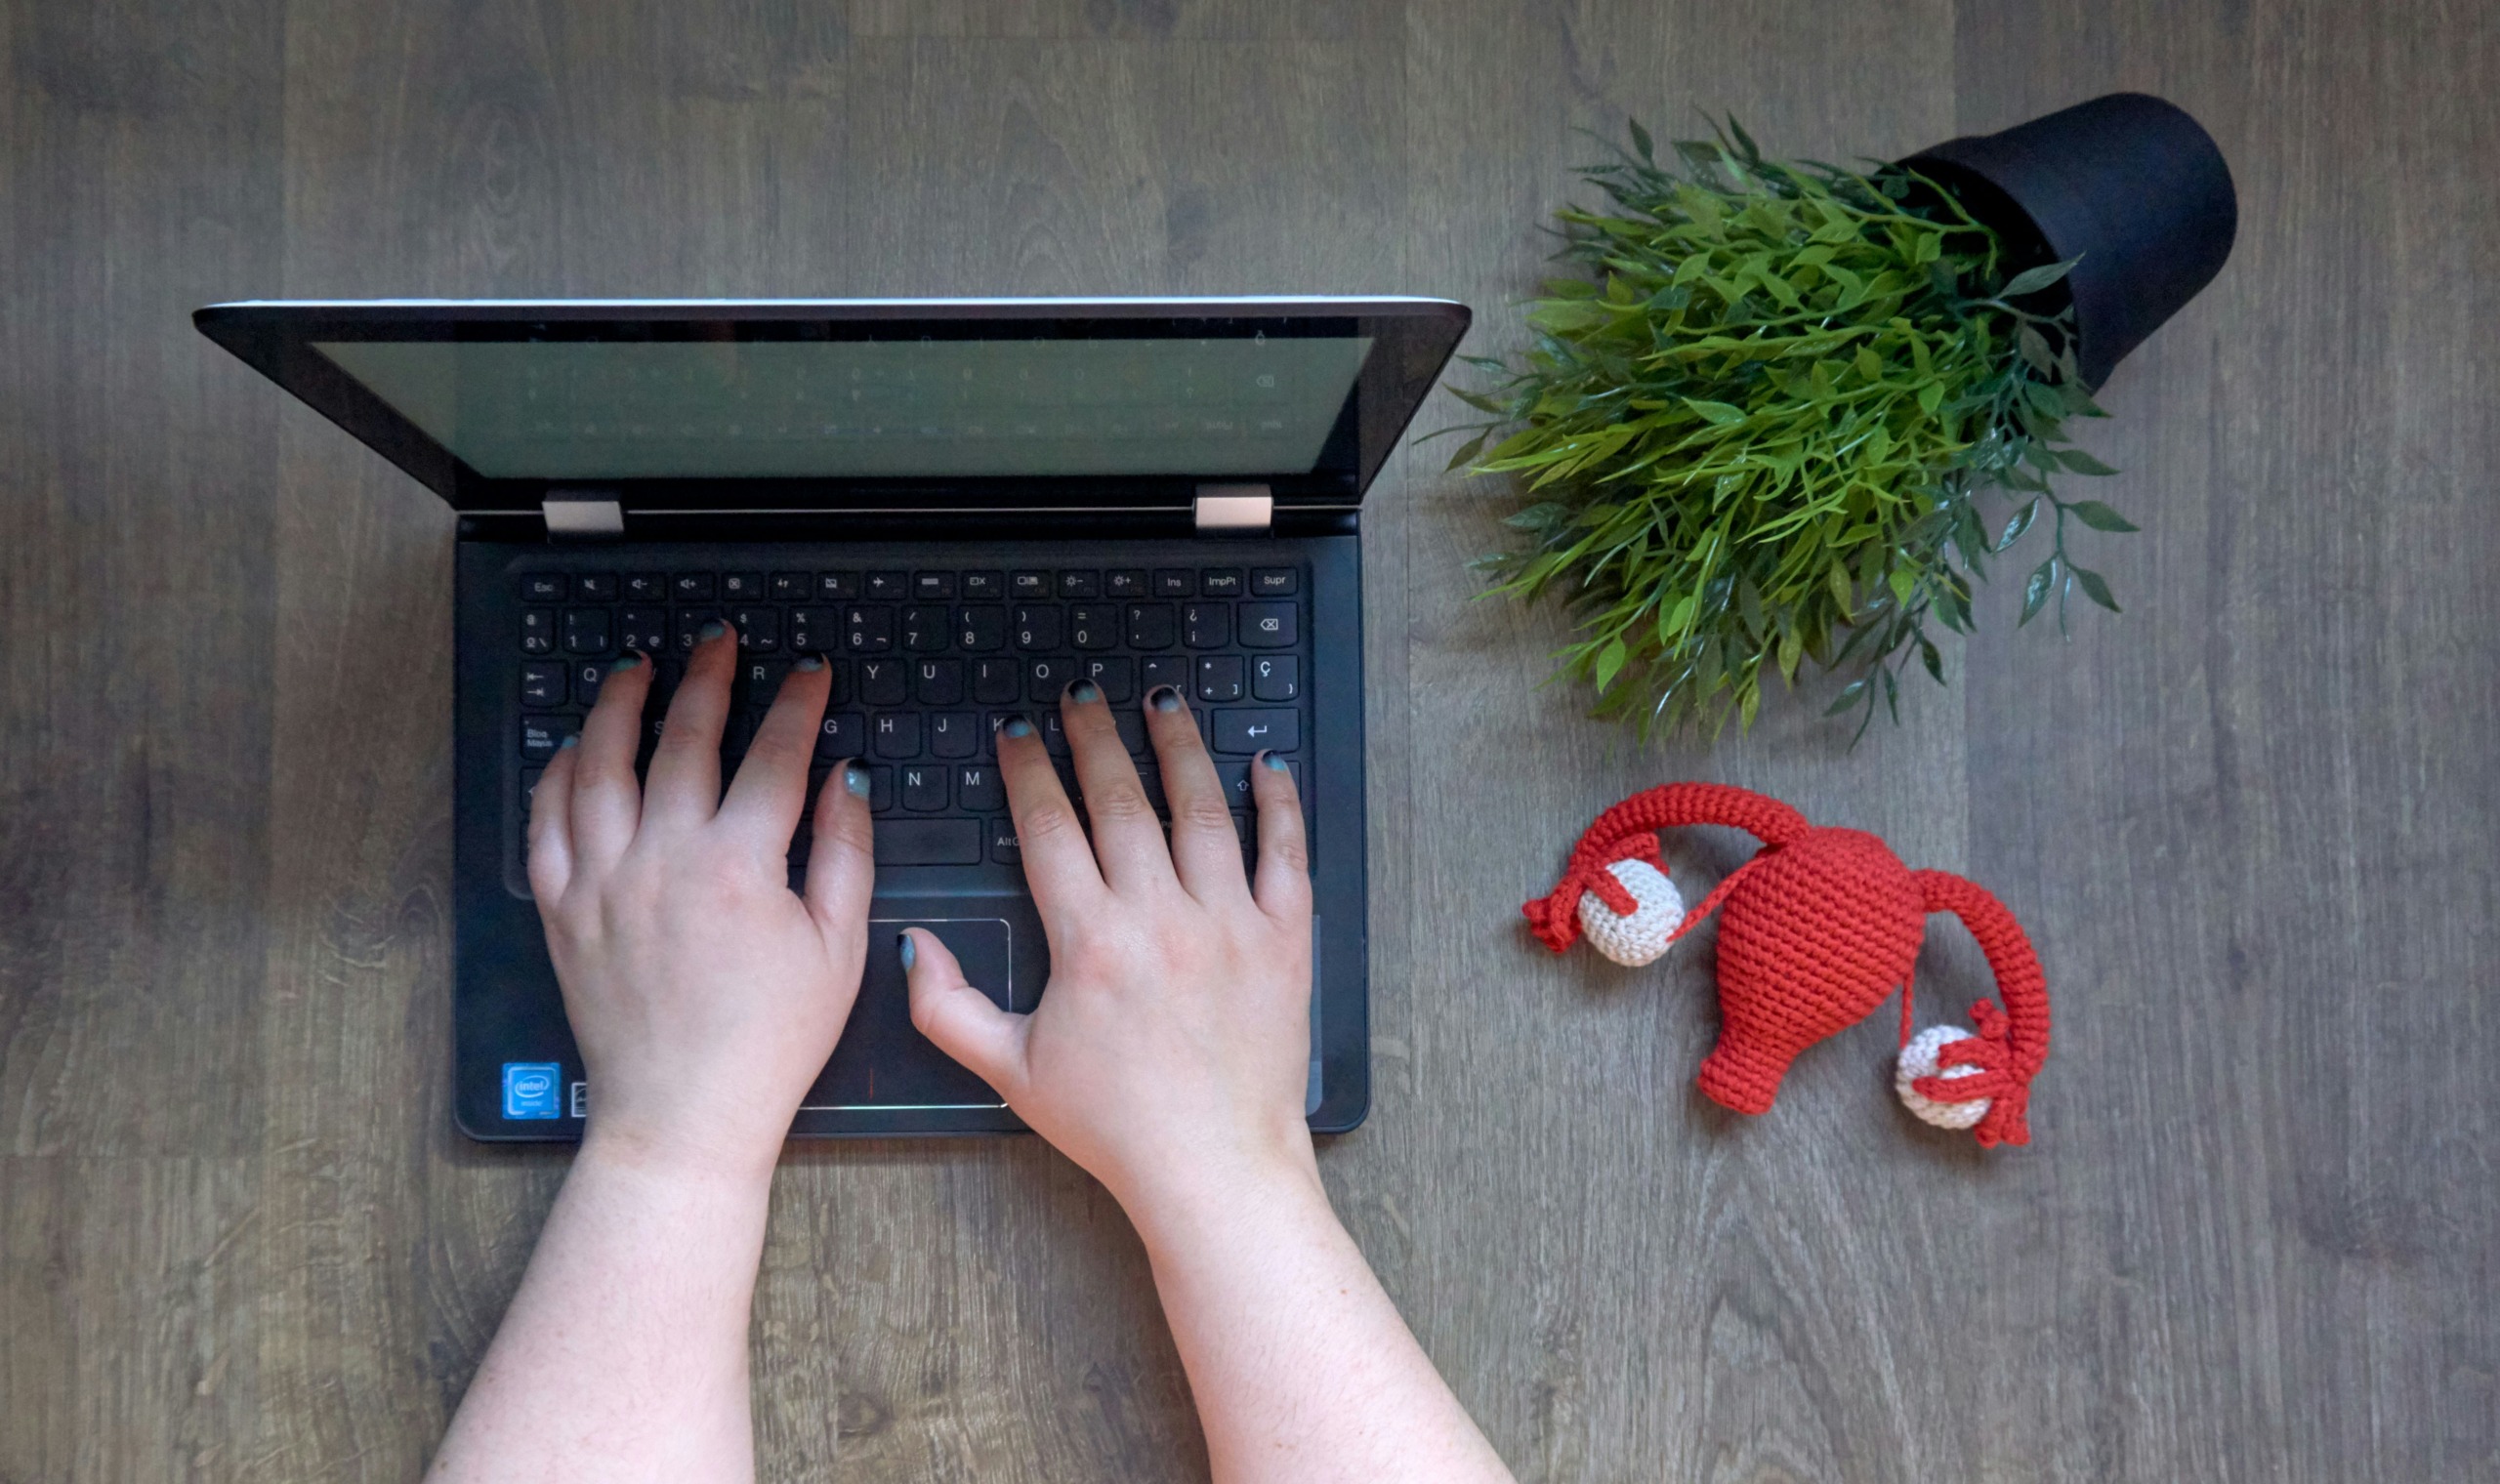 hands on a laptop keyboard next to a model of an enlarged uterus